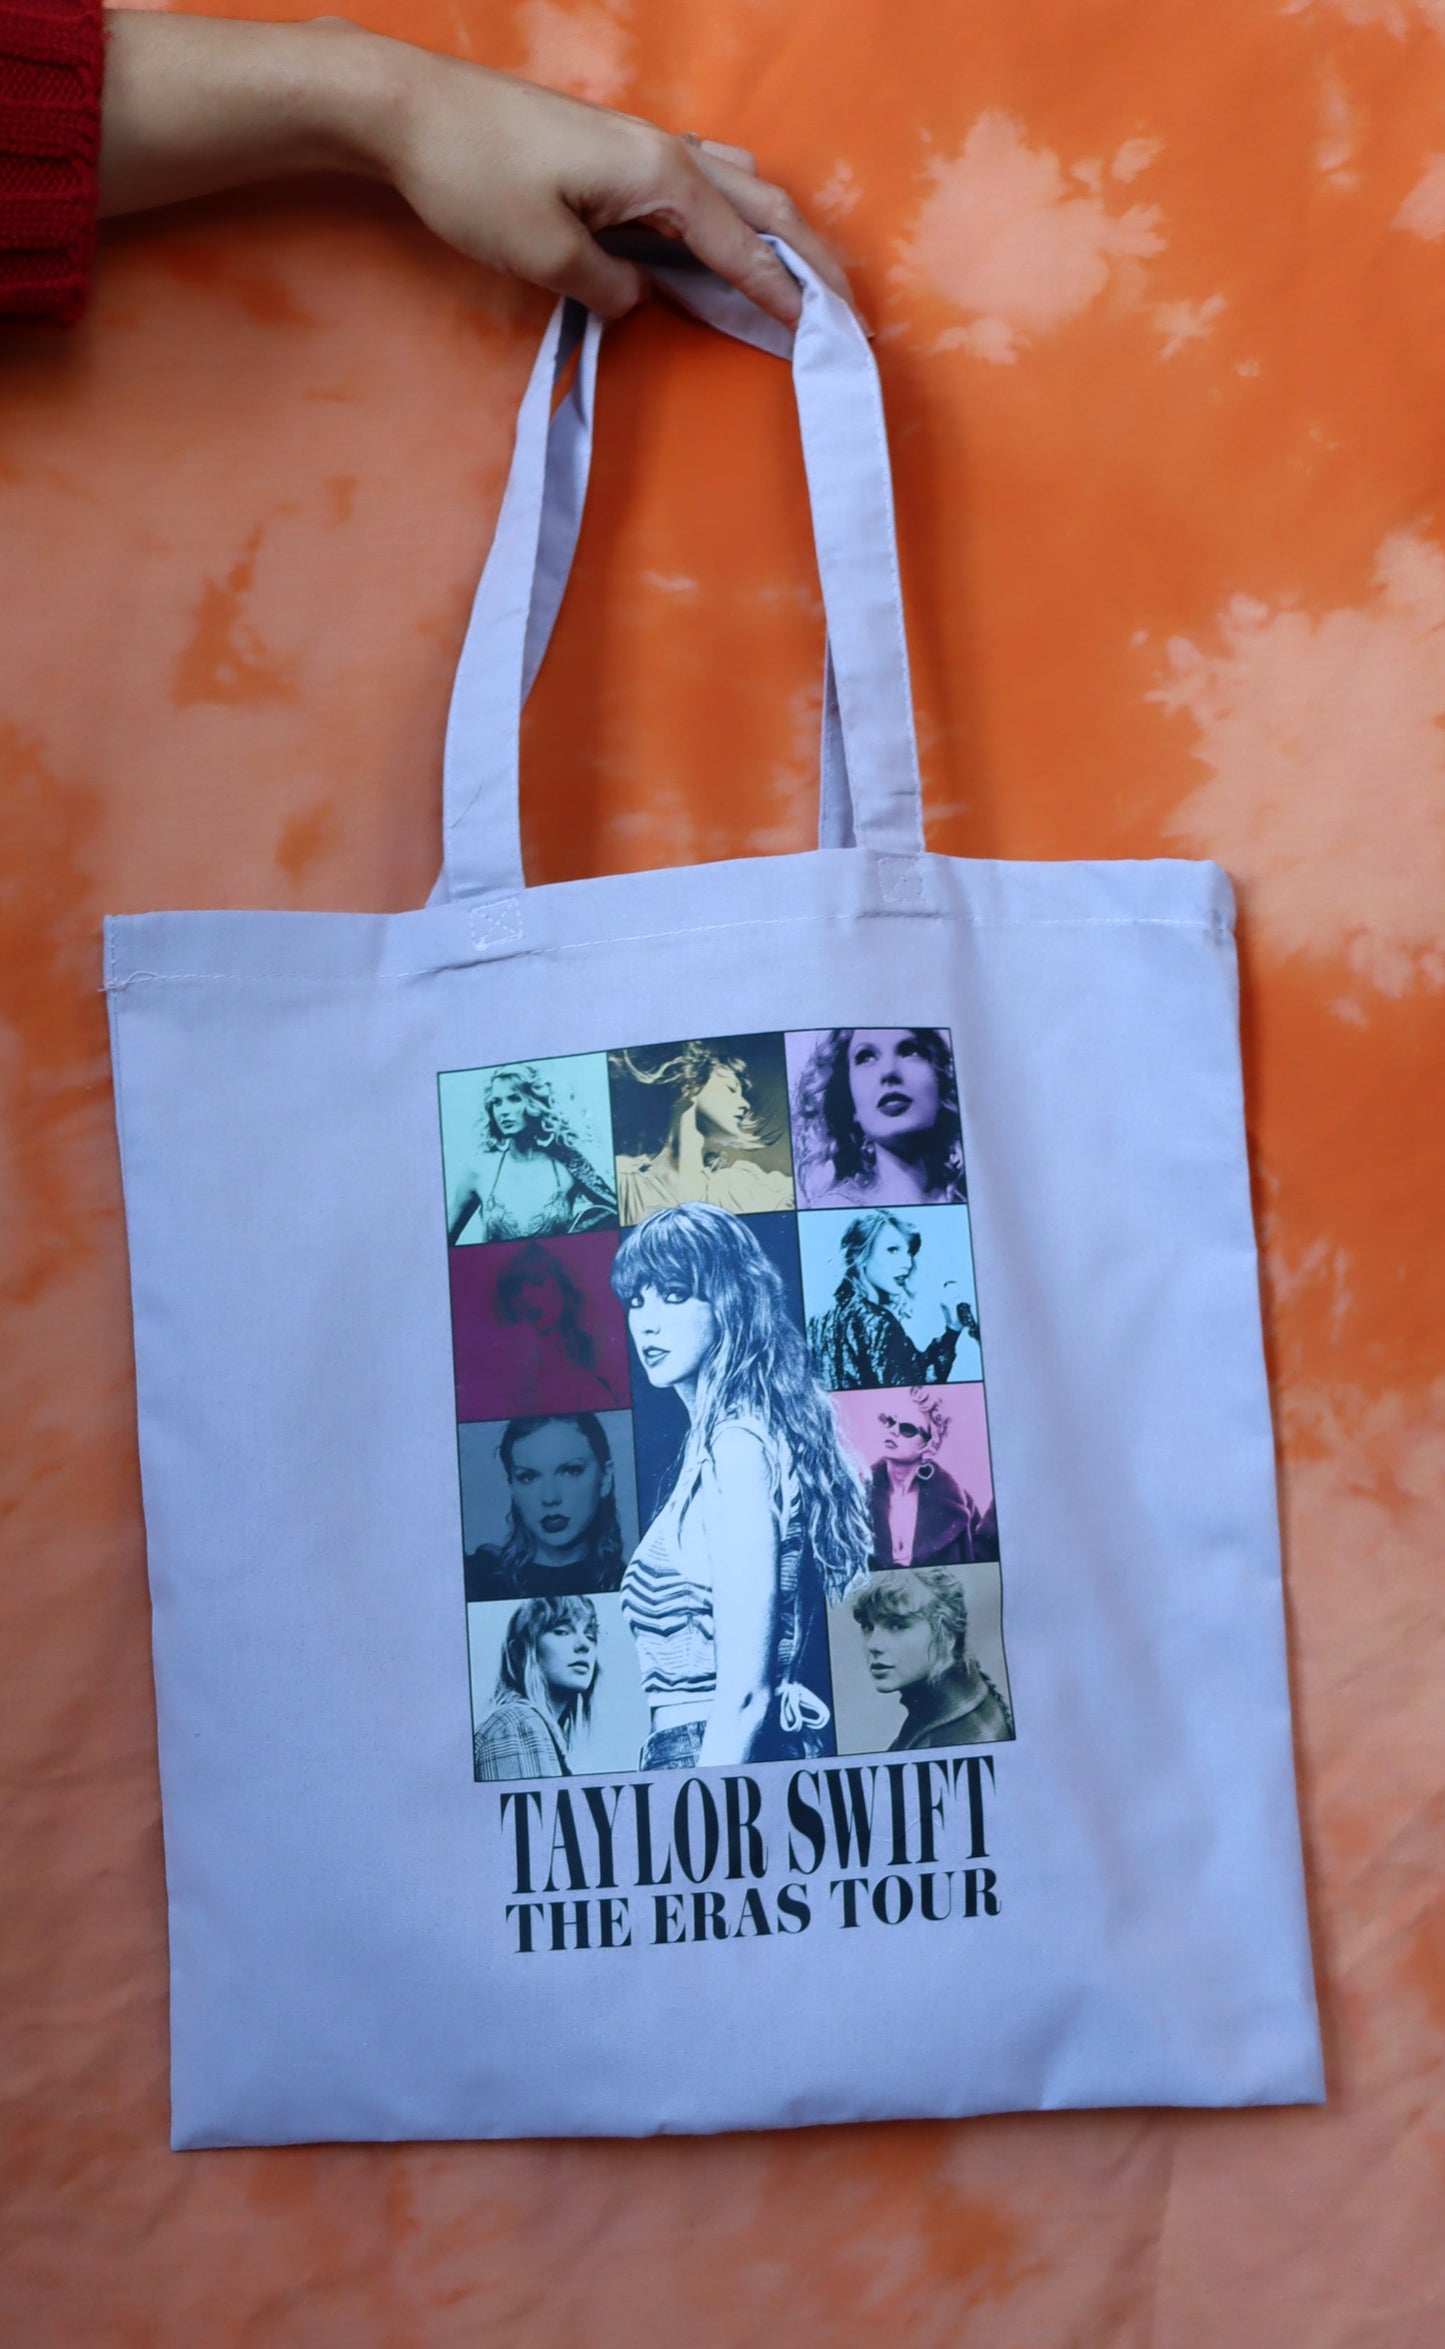 Colorful Graphic Print Tote bags